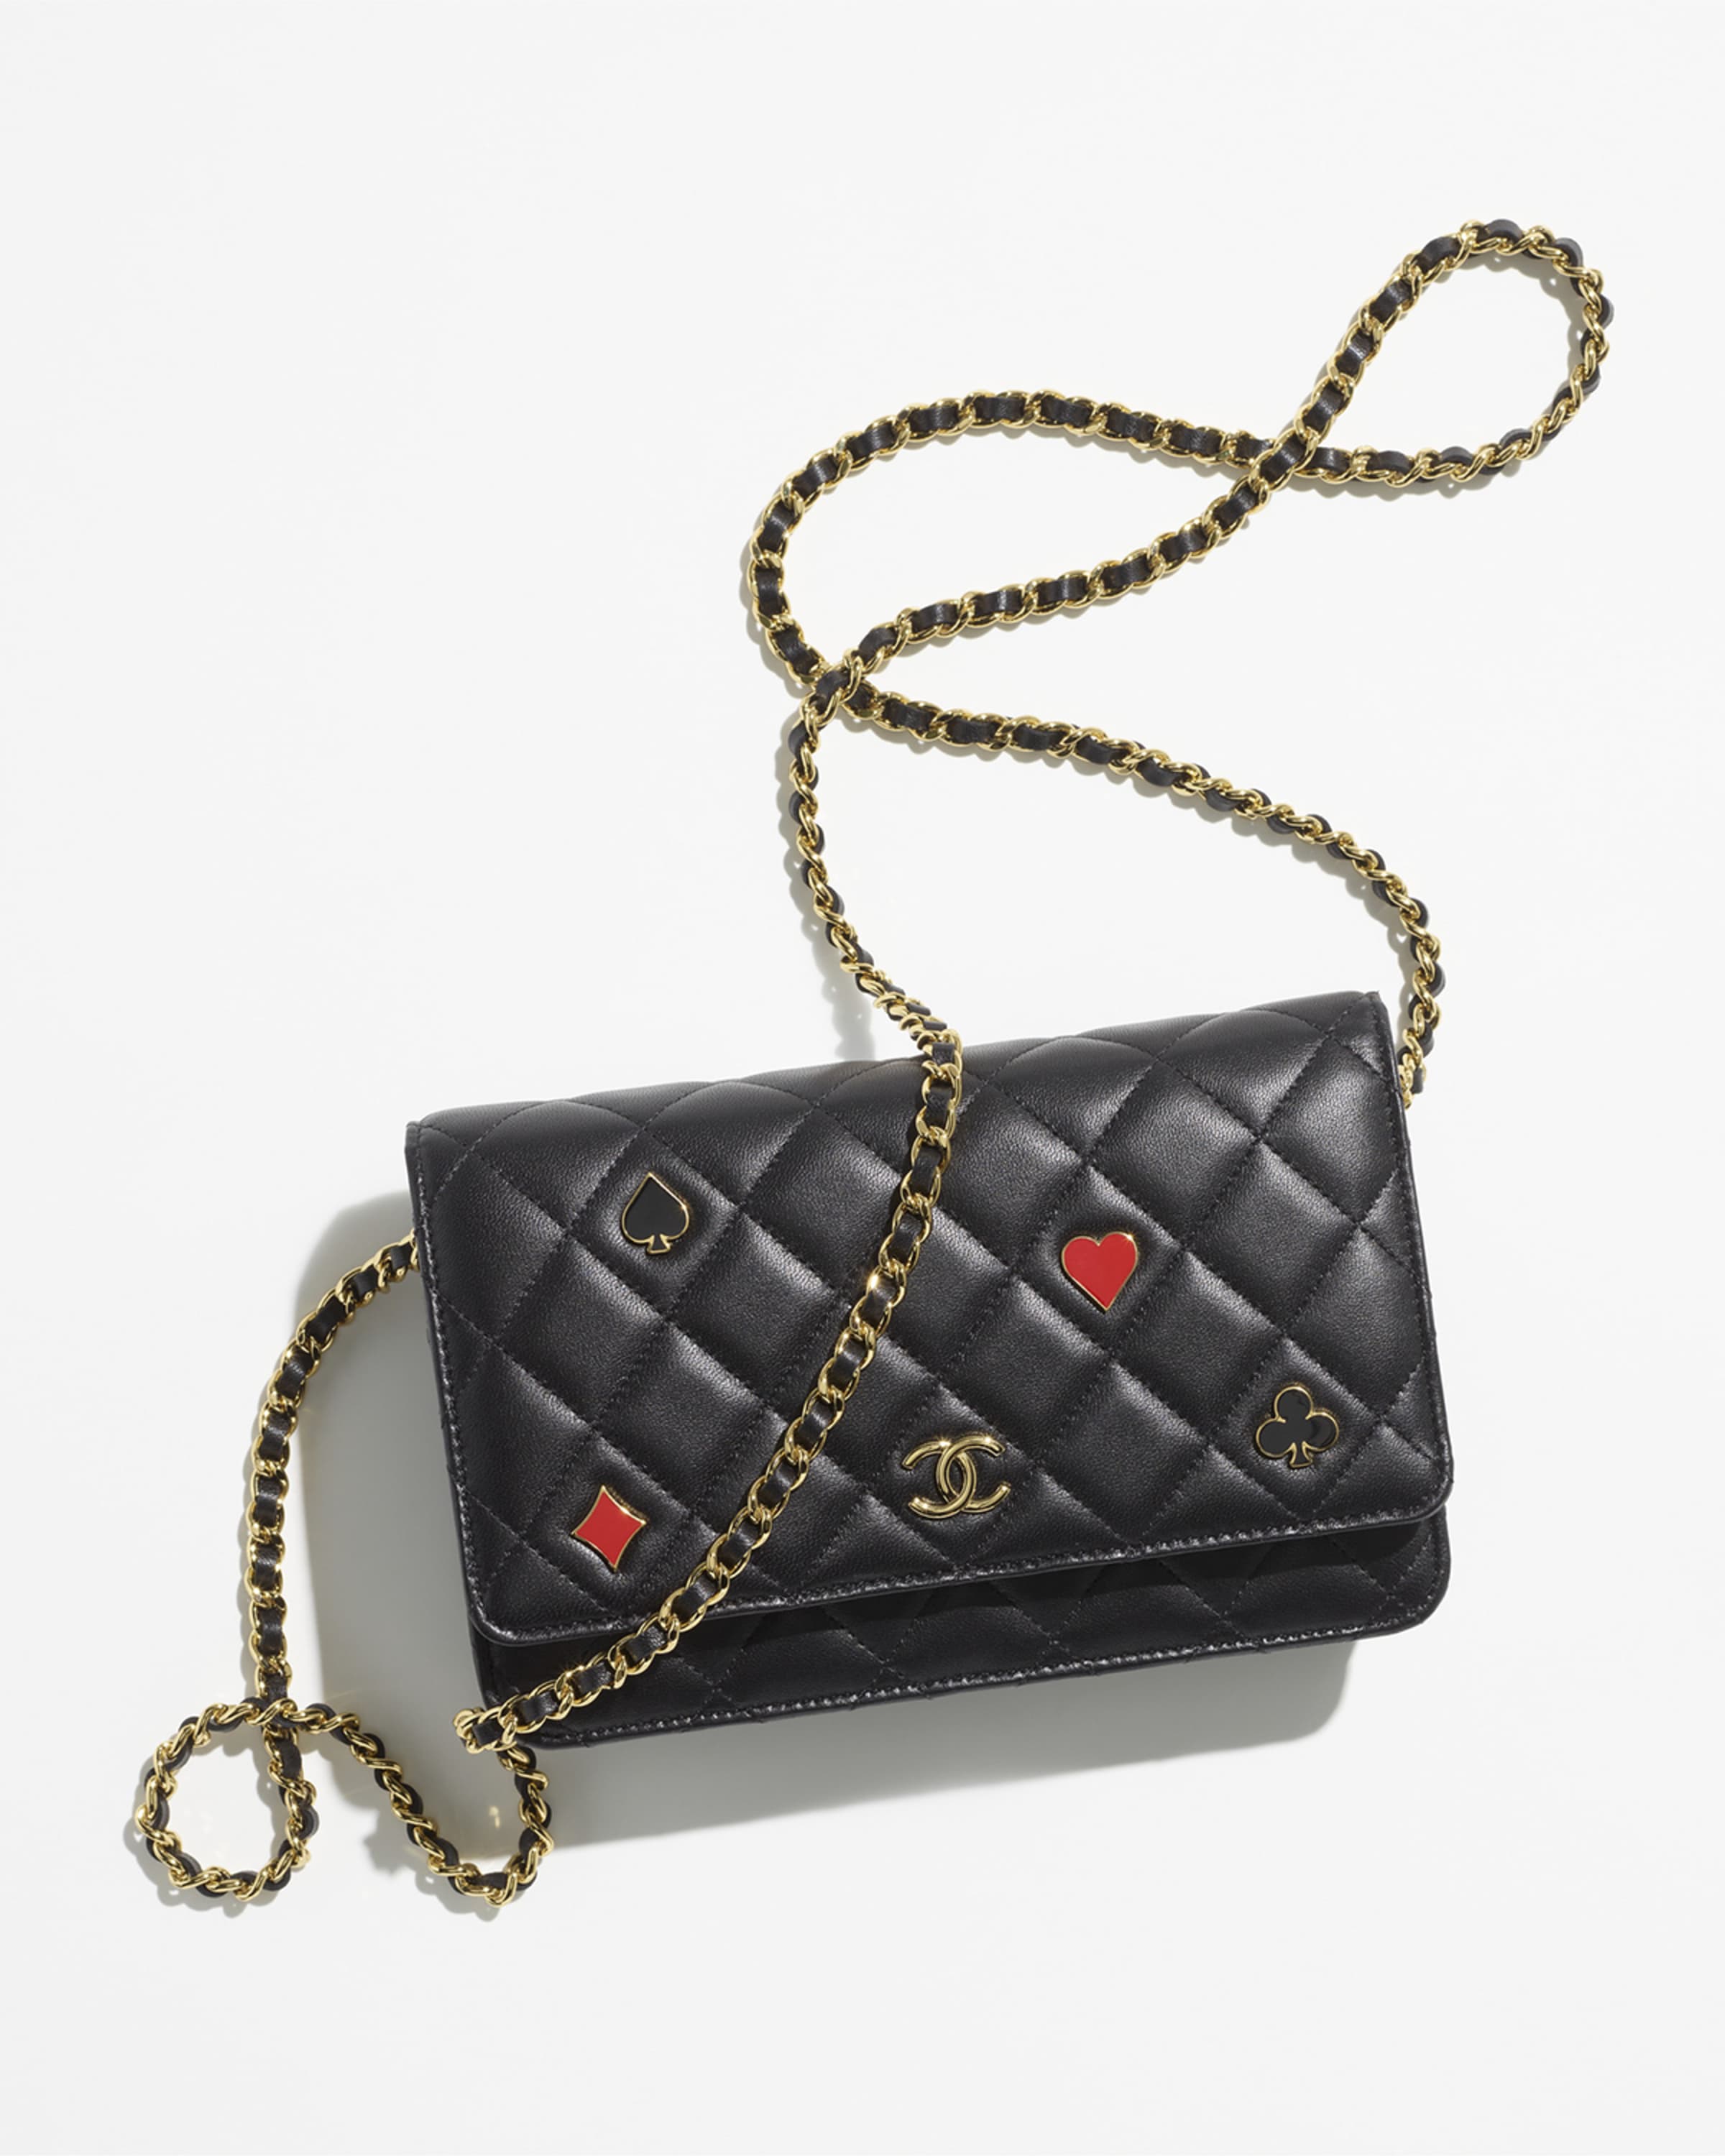 CHANEL WALLET ON CHAIN | Neiman Marcus